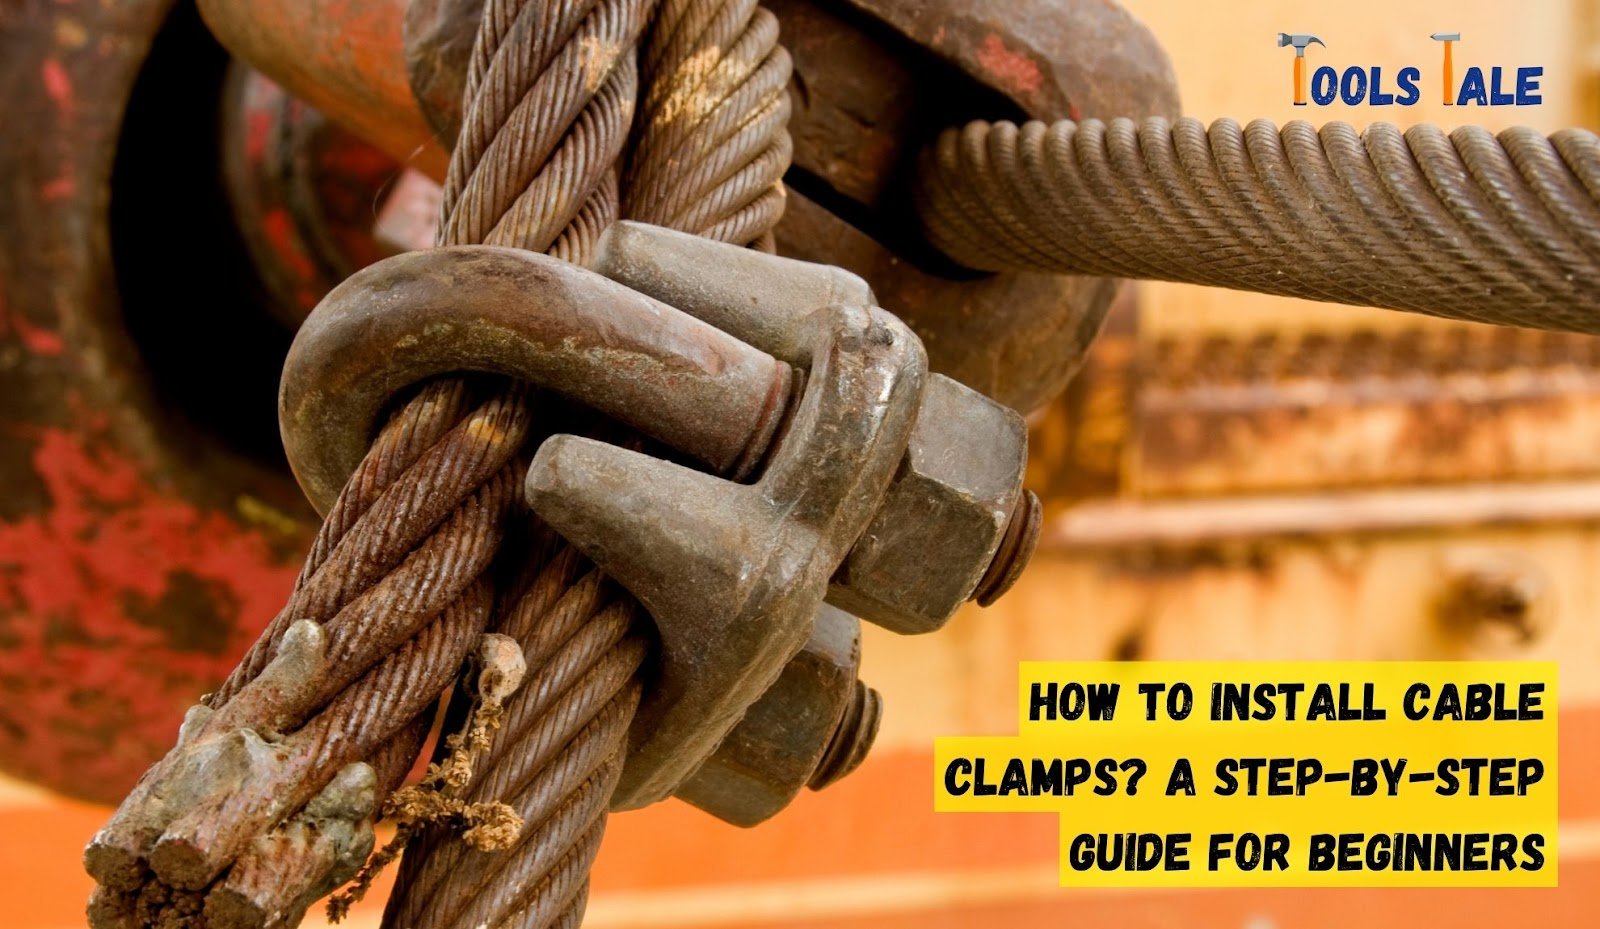 How to install cable clamps